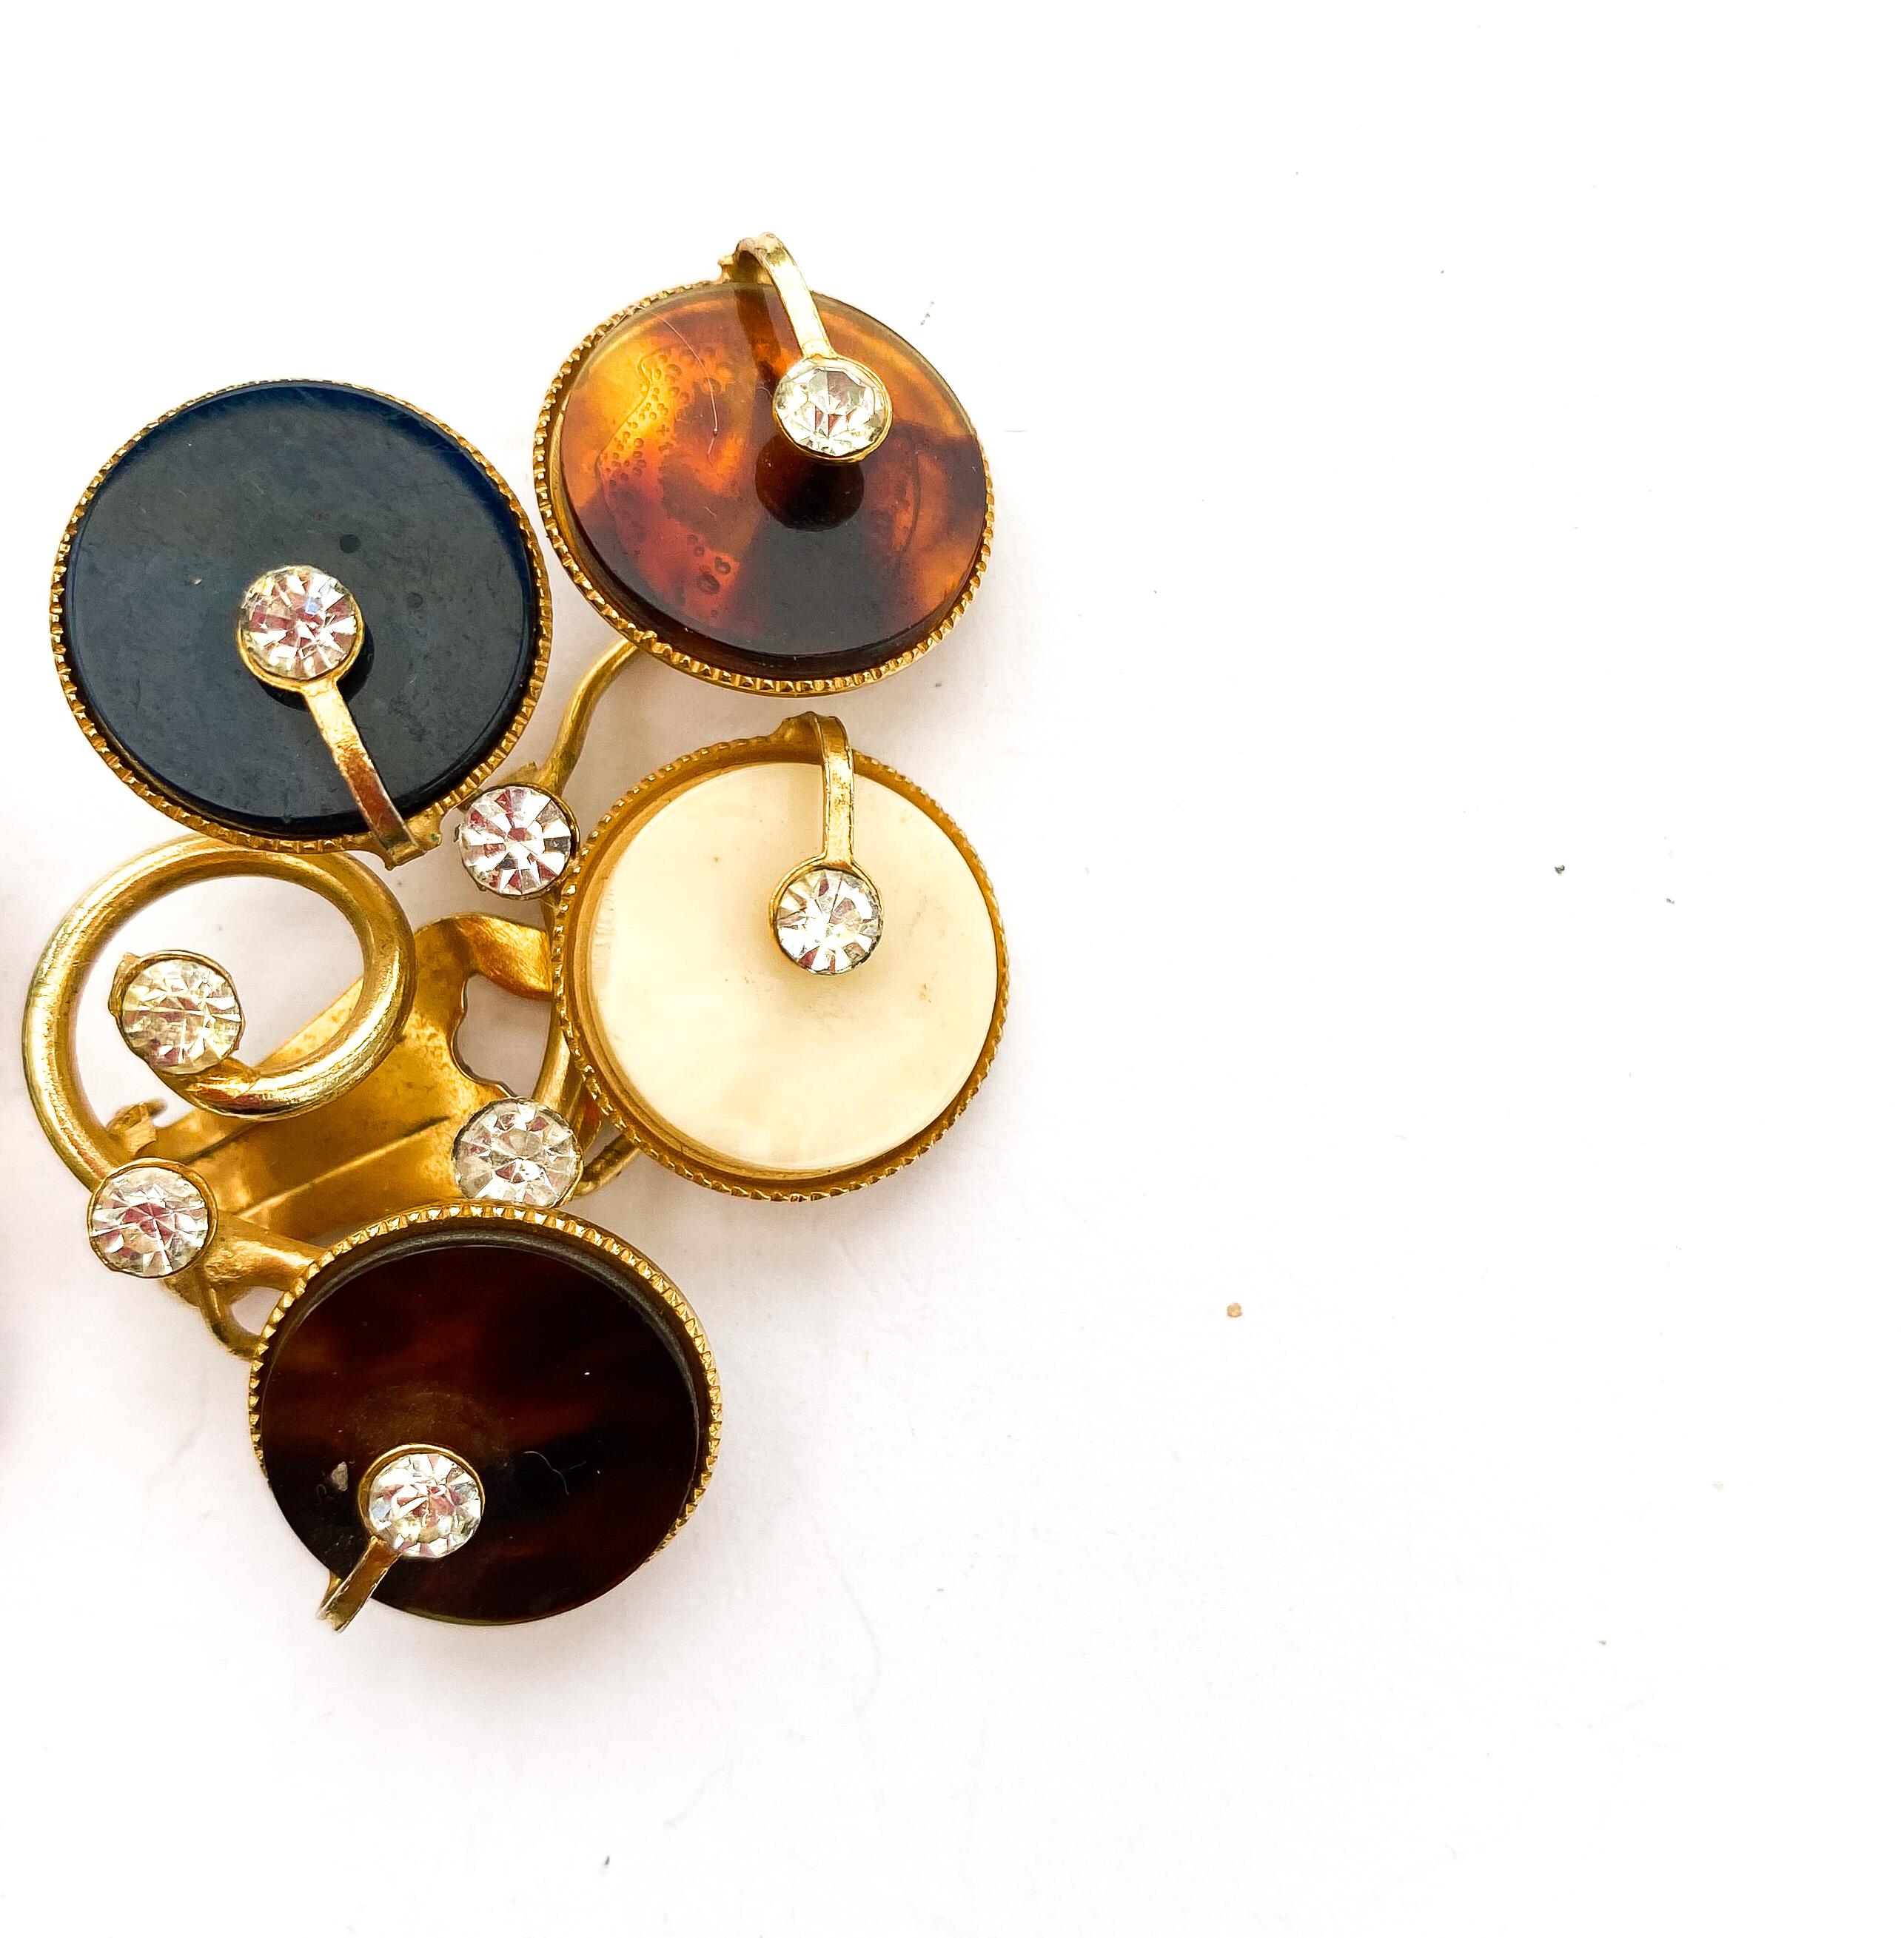 These beautiful earrings are highly individual and stylised but immediately eye catching. Very typical of Italian design during this period. An unusual colour combination, mixing plastic with clear paste, and softly gilded metal make these truly